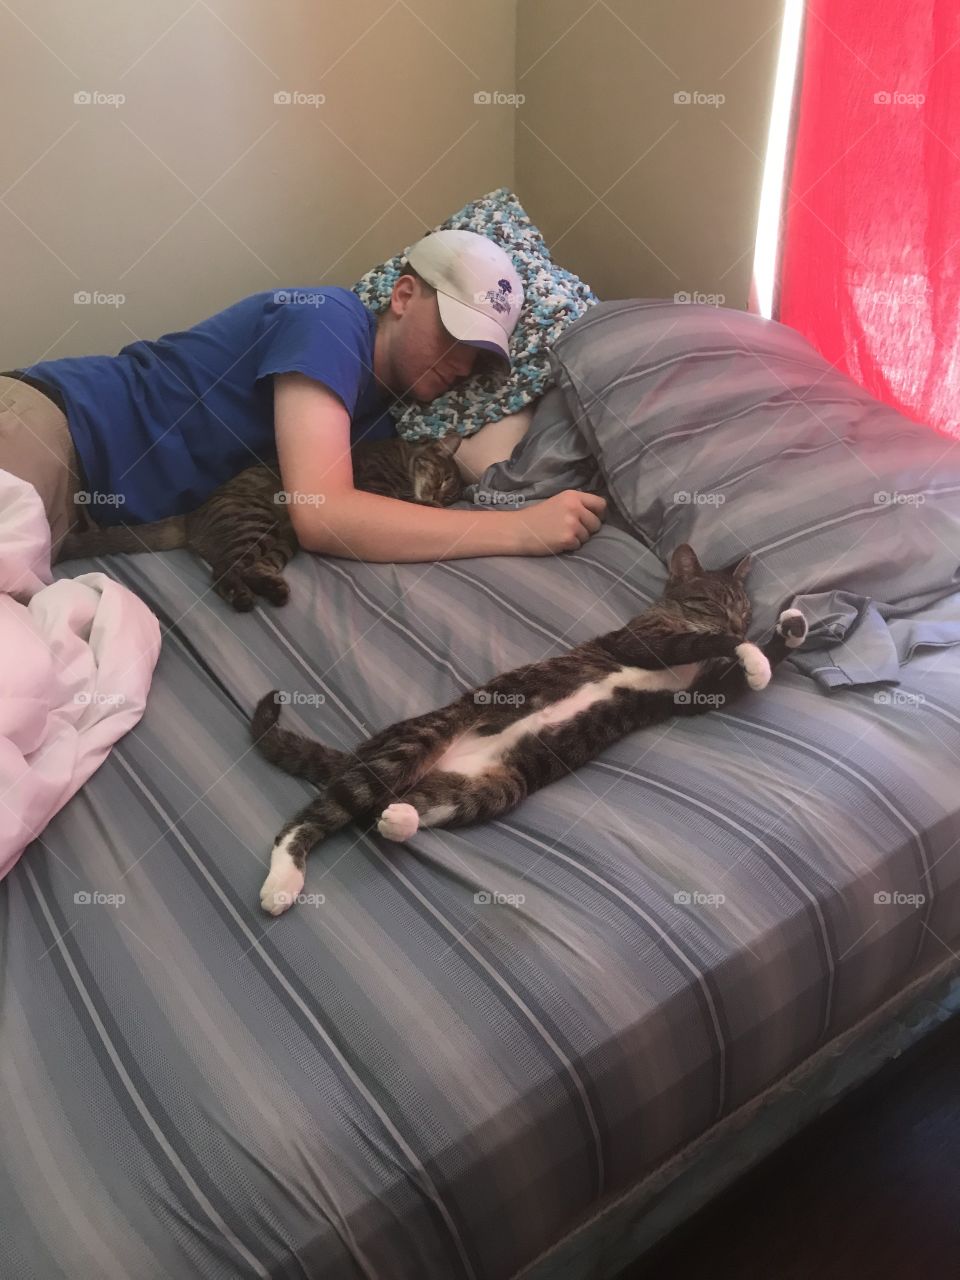 Sleeping with the cats